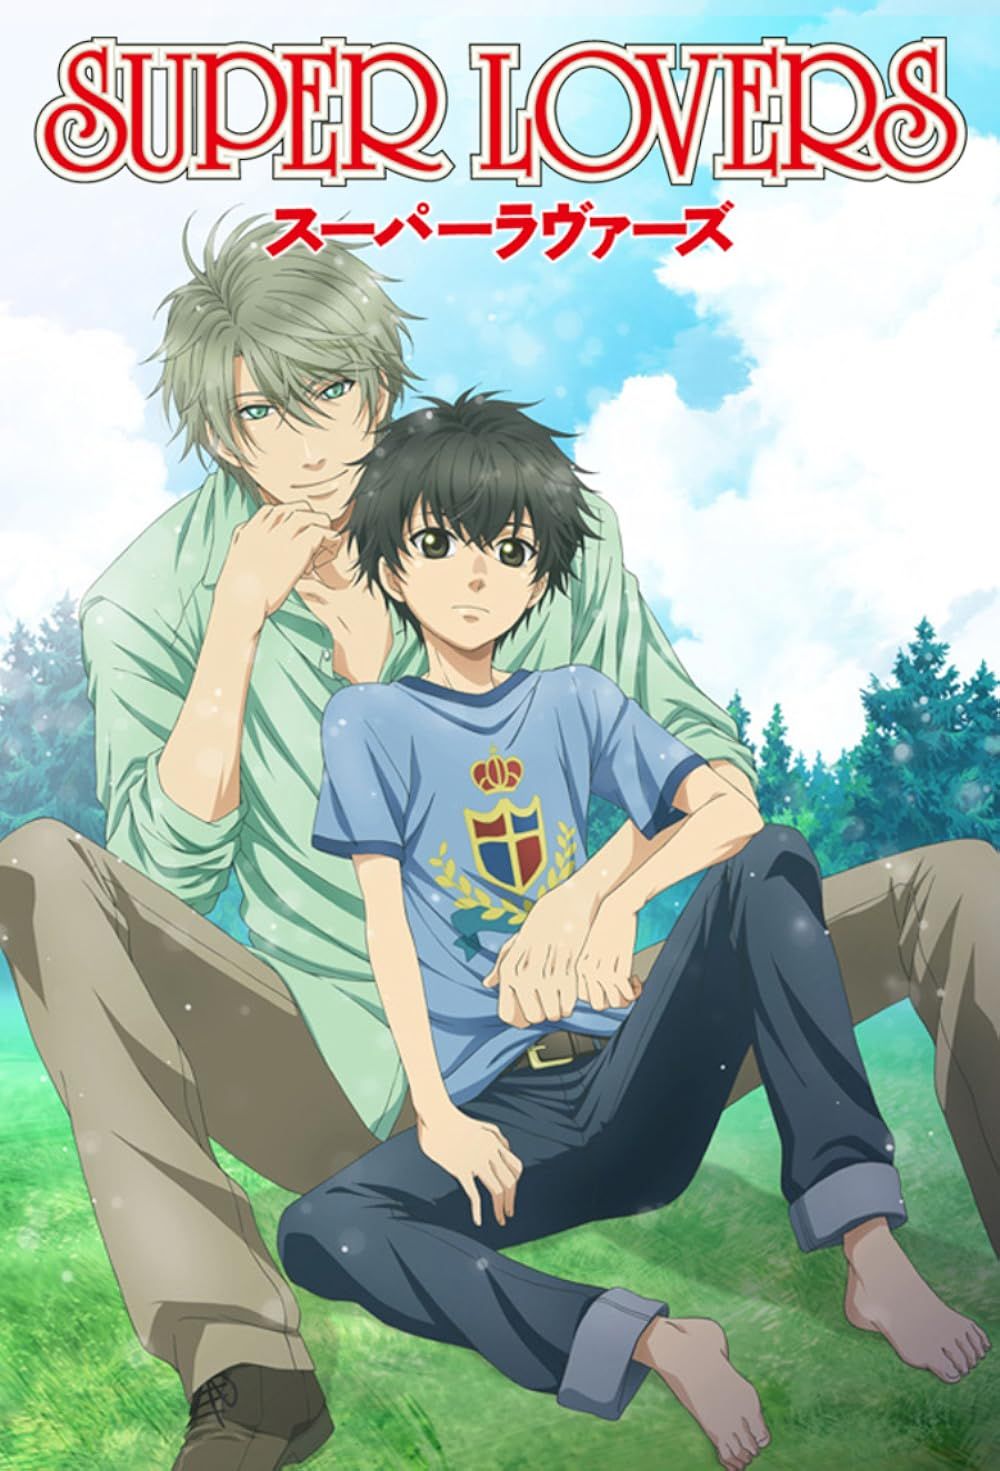 Haru and Ren on the Super Lovers Promo